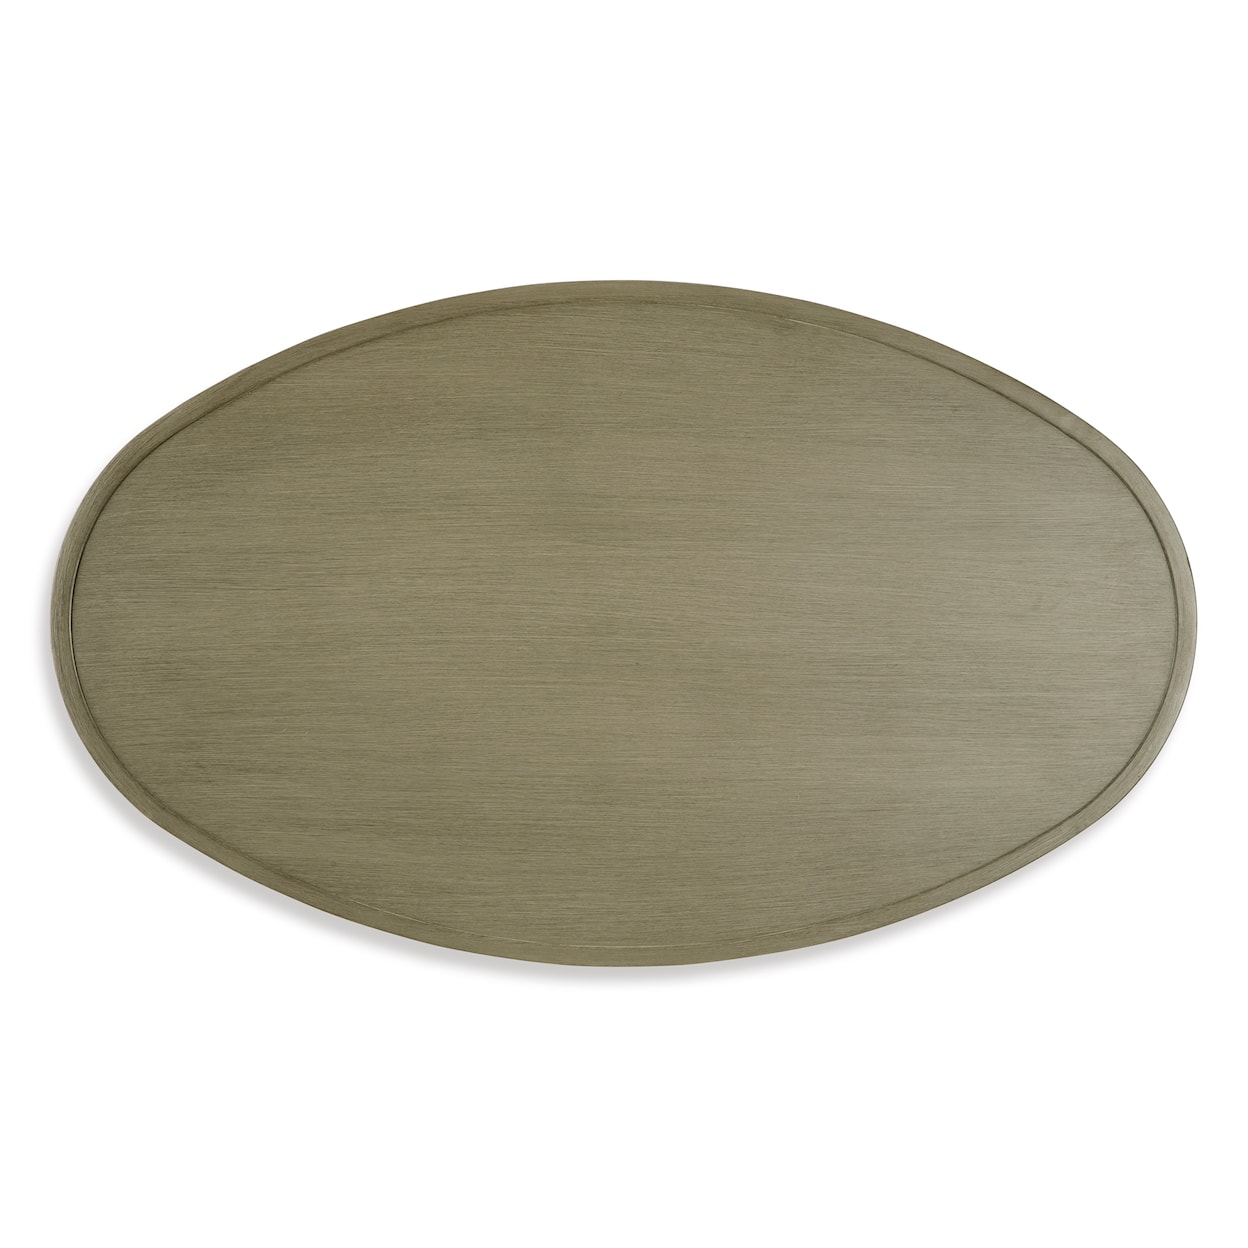 Signature Design by Ashley Swiss Valley Outdoor Coffee Table